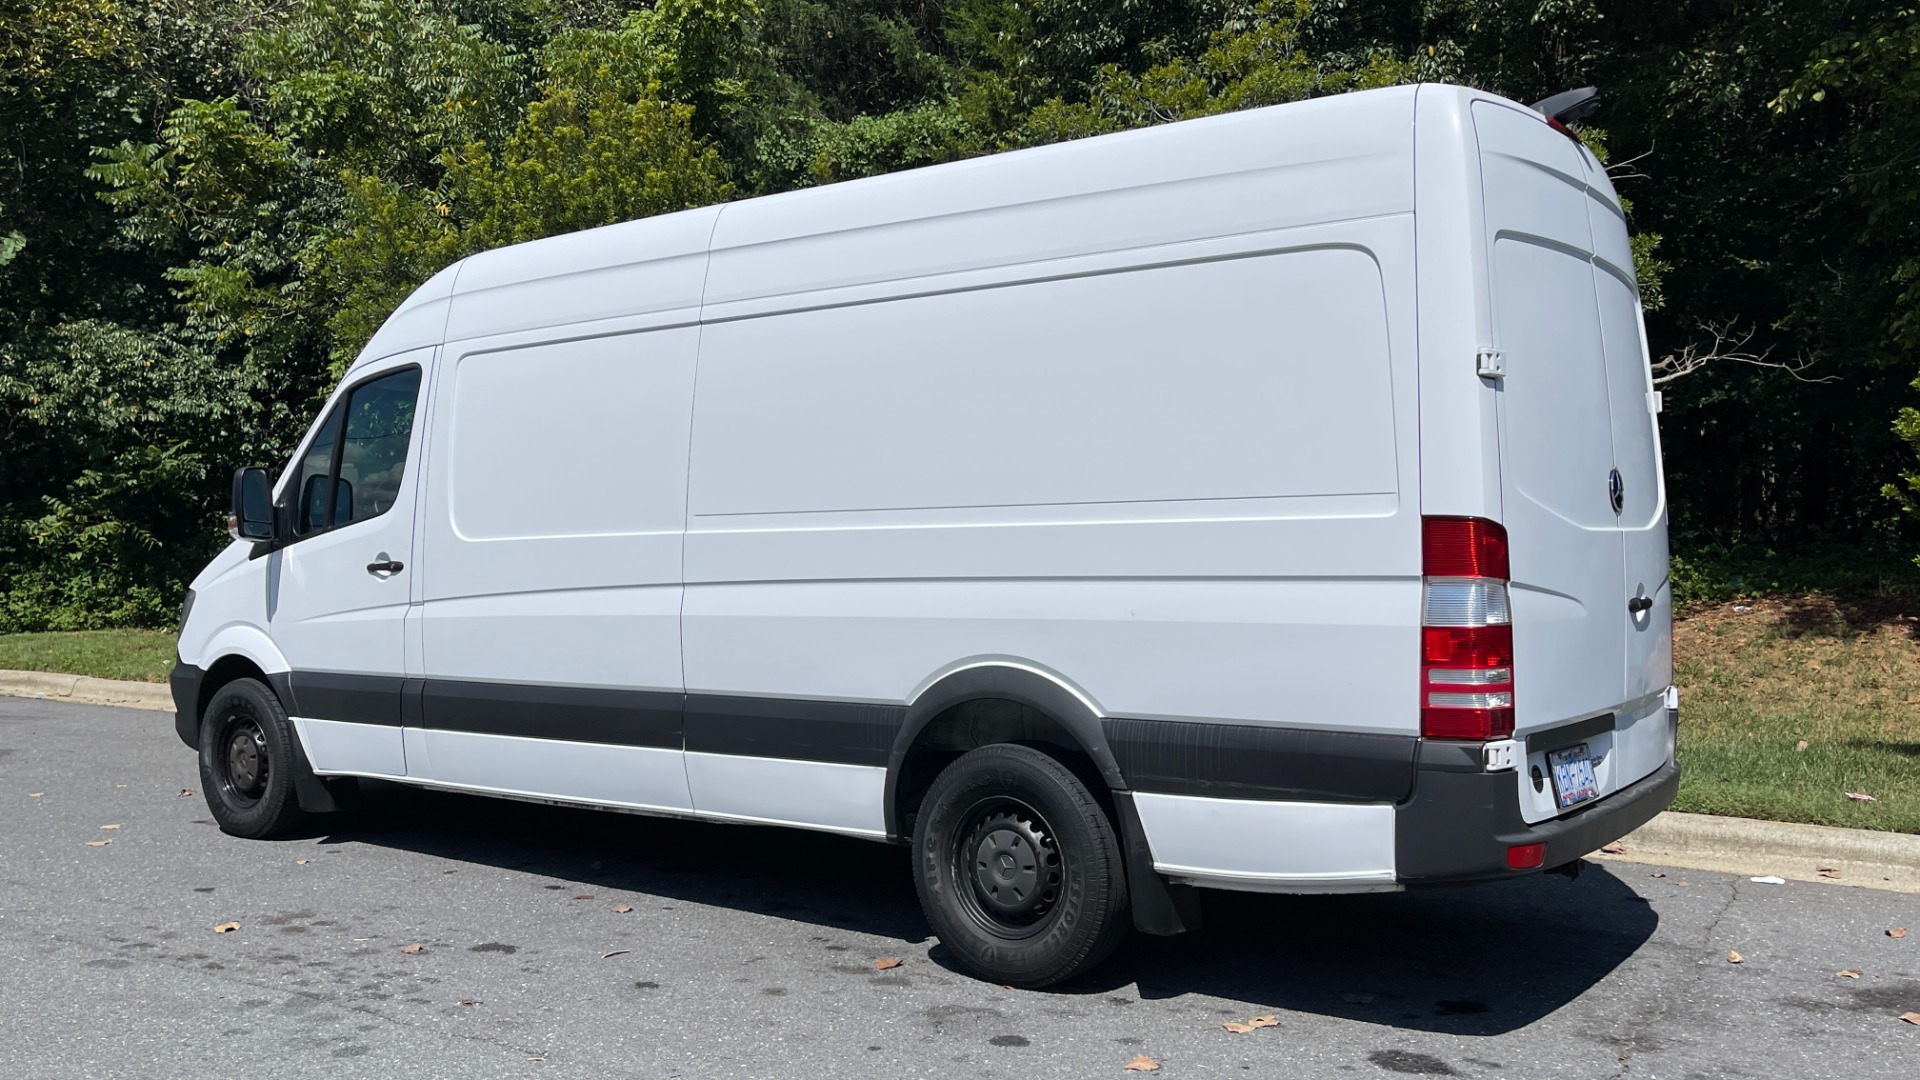 Used 2017 Mercedes-Benz SPRINTER CARGO VAN WORKER / DIESEL / AC / INSULATED / REAR AIR / BACKUP CAMERA / CLOTH SEATS / for sale $16,999 at Formula Imports in Charlotte NC 28227 4